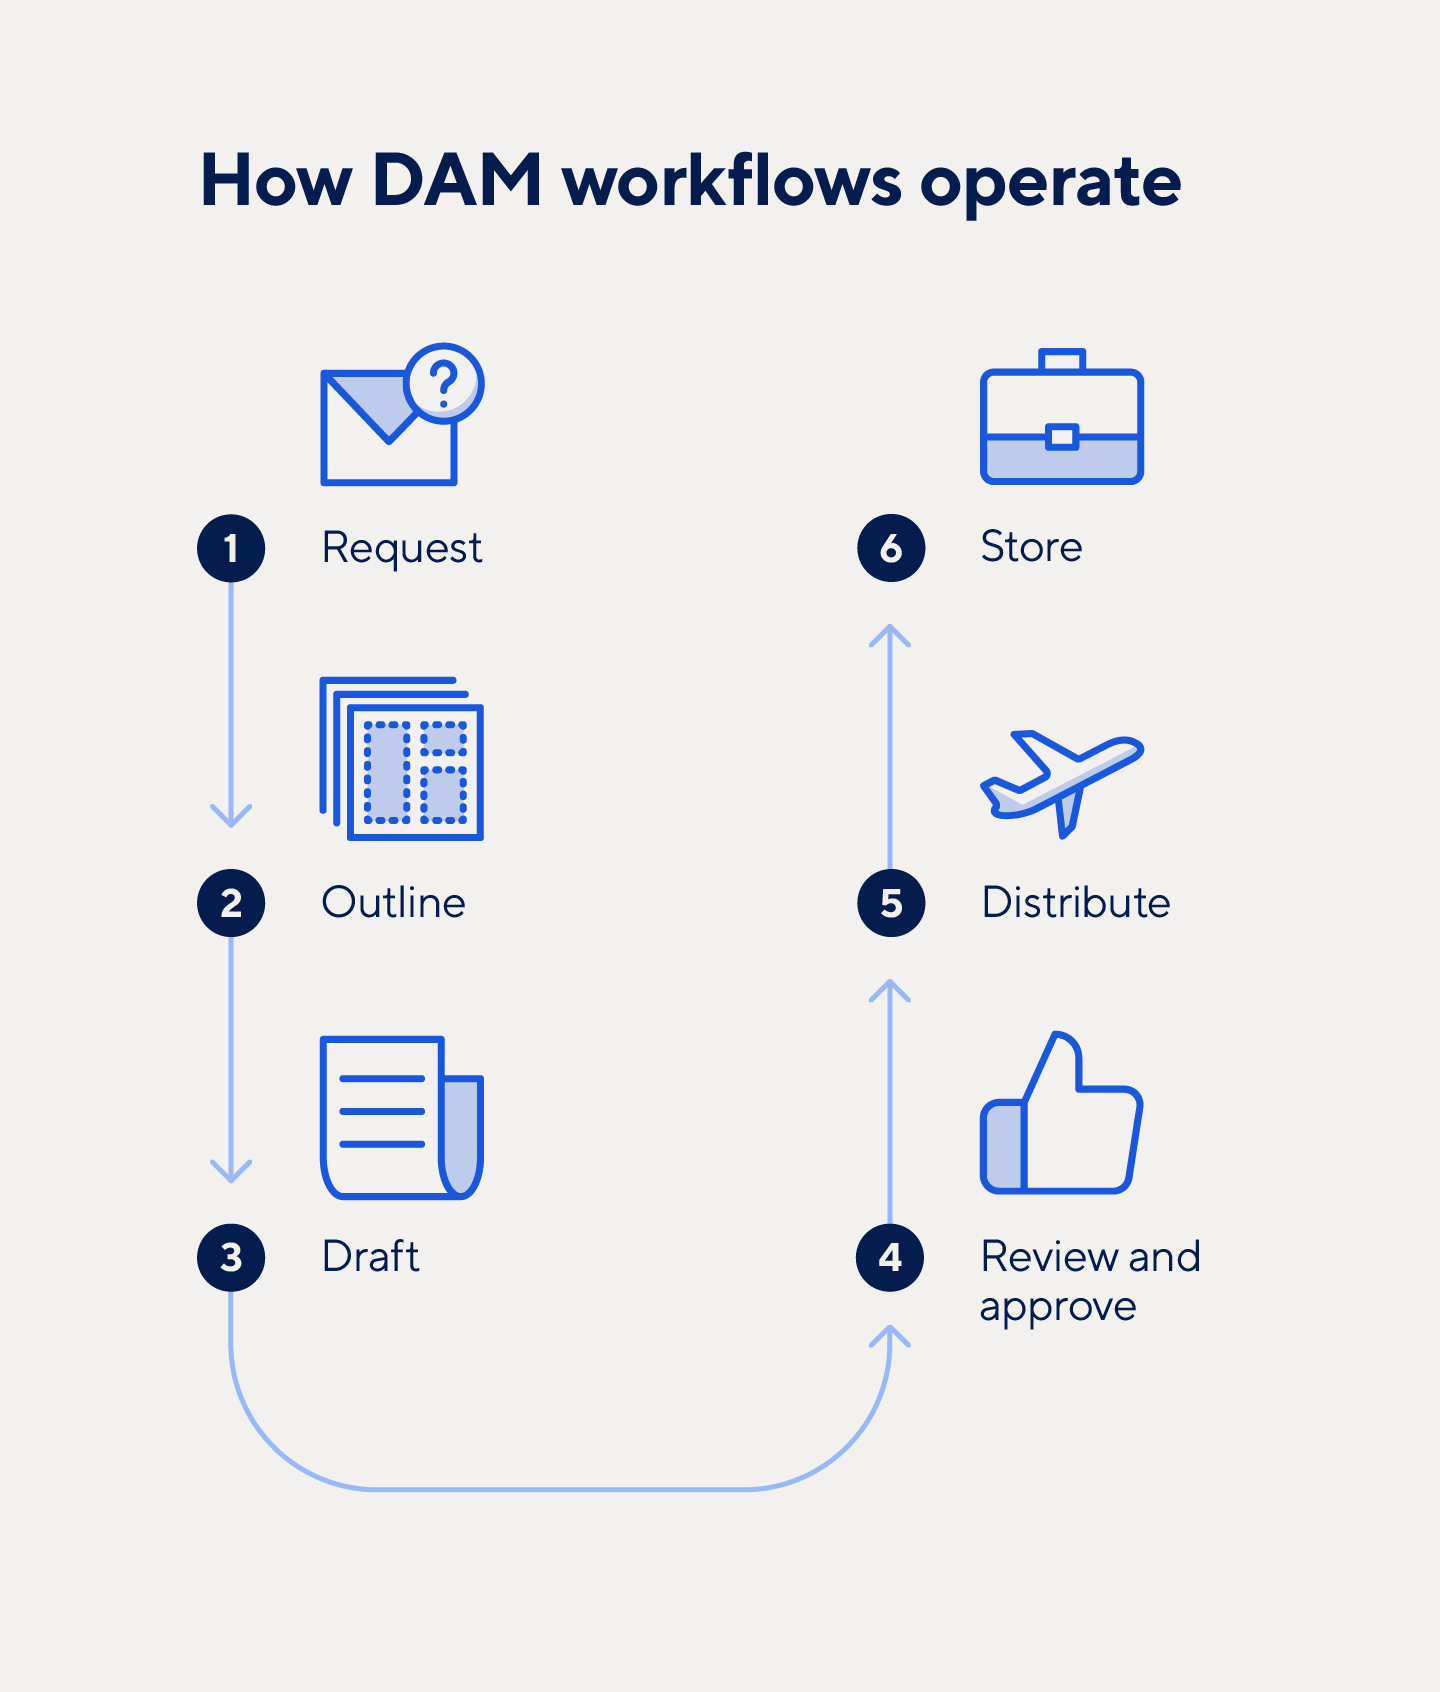 A DAM workflow follows six steps, including request, outline, draft, review and approve, distribute, and store phases.